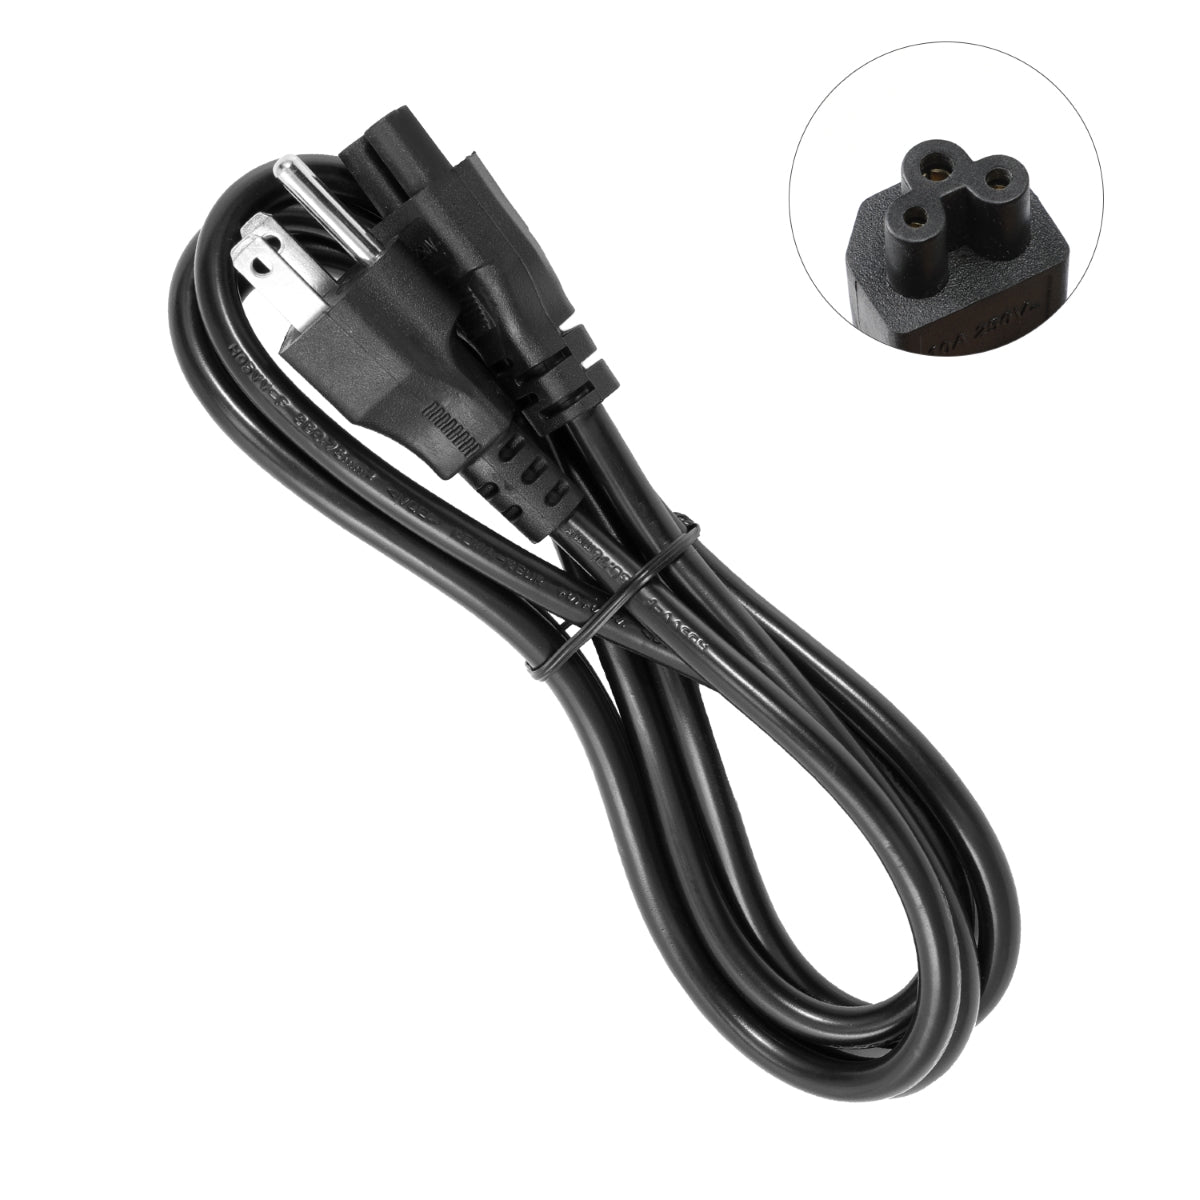 Power Cord for LG 60LN5400 Monitor.